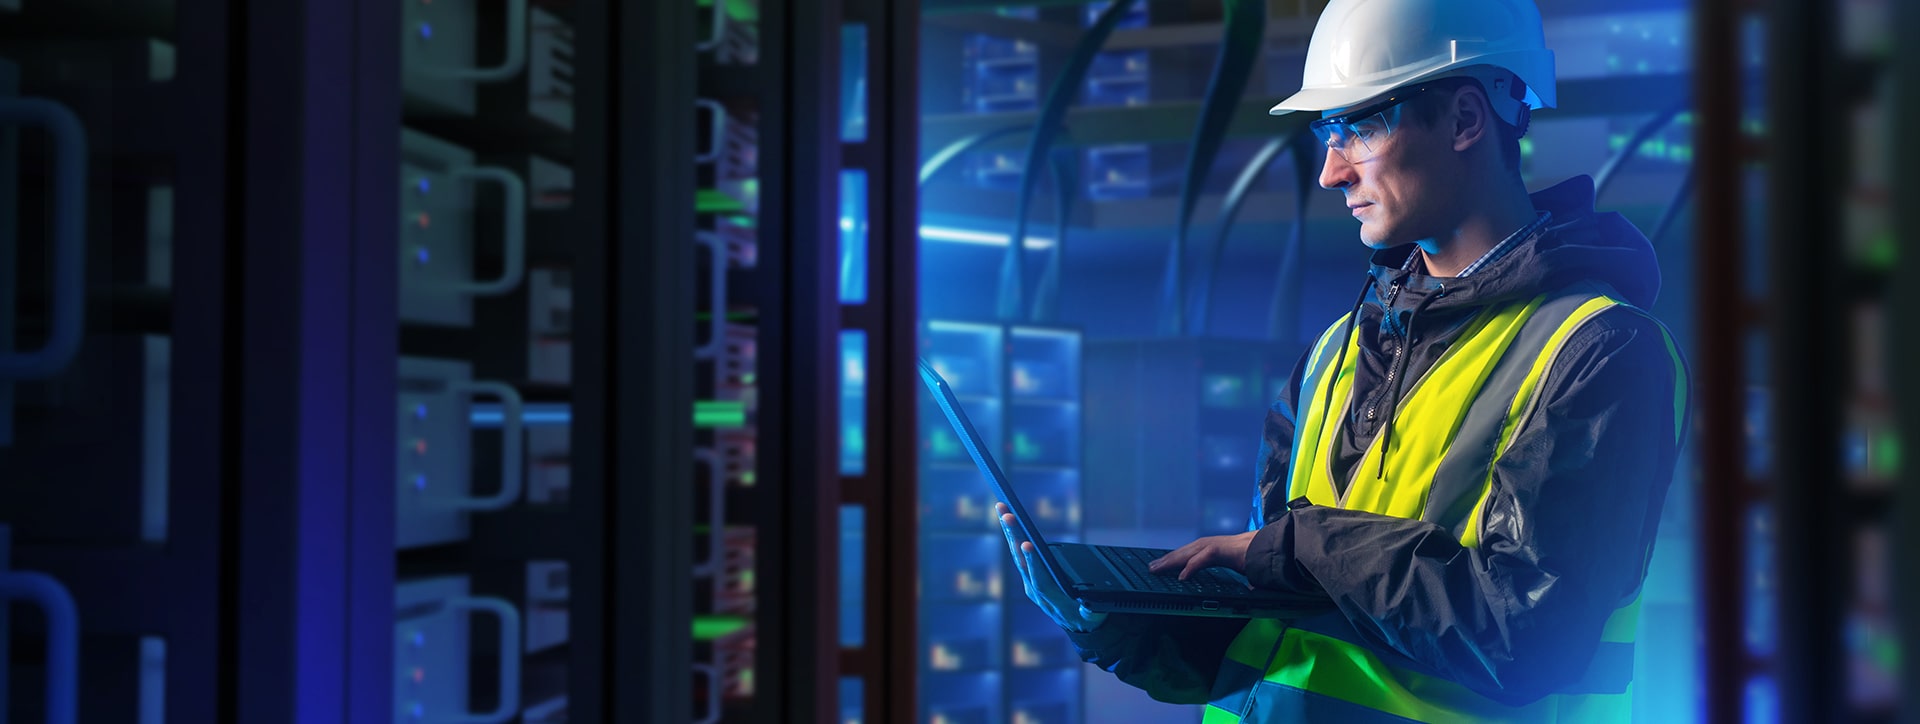 A person in a hard hat and high visibility vest working on a laptop in a server room.